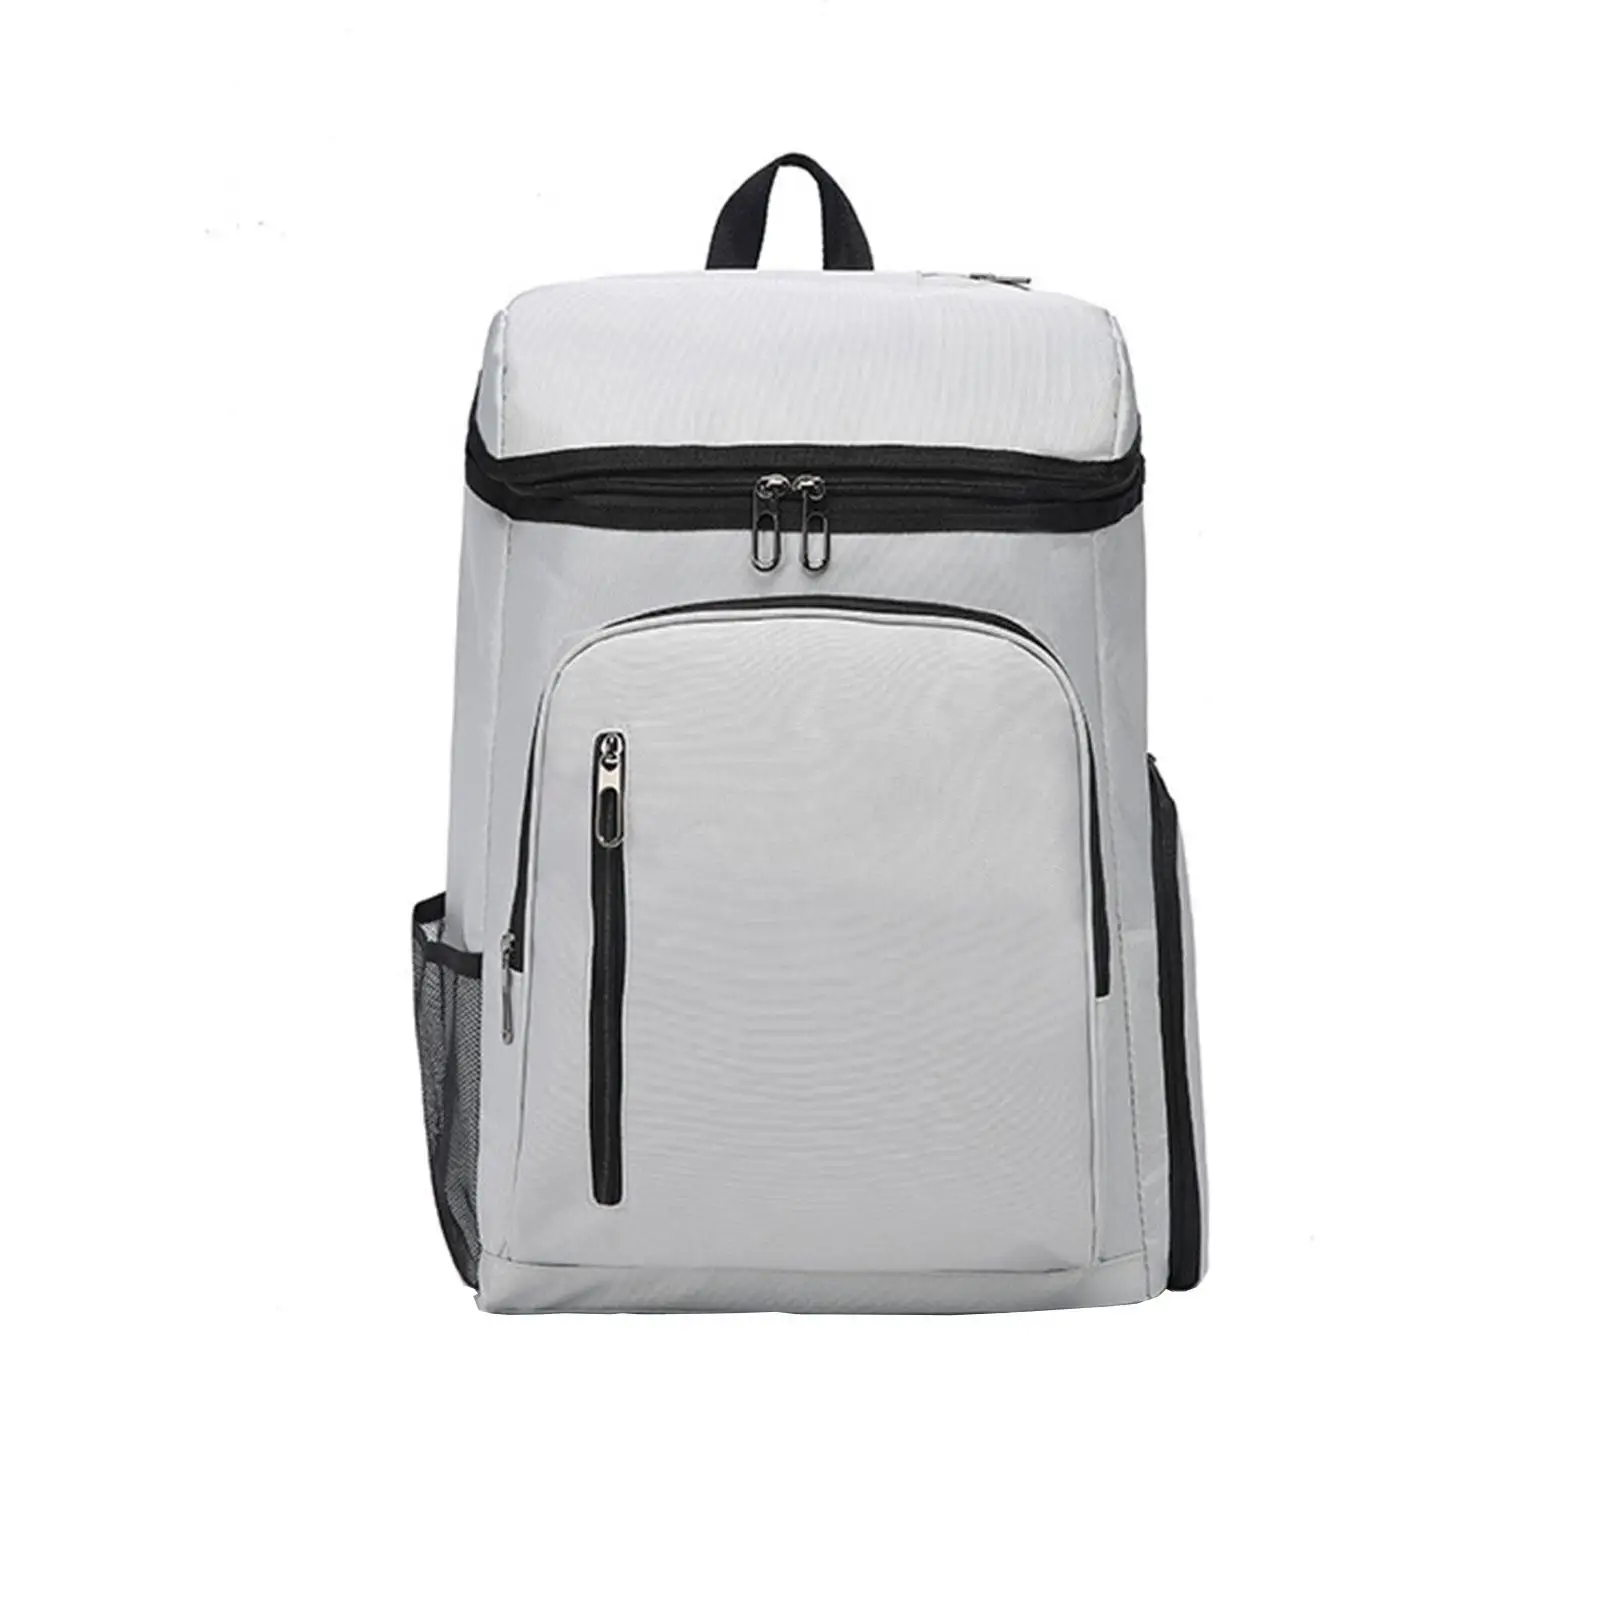 Tennis Backpack Large Capacity with Shoe Compartment Racquet Bag Badminton Backpack for Squash Racquets Balls Accessories